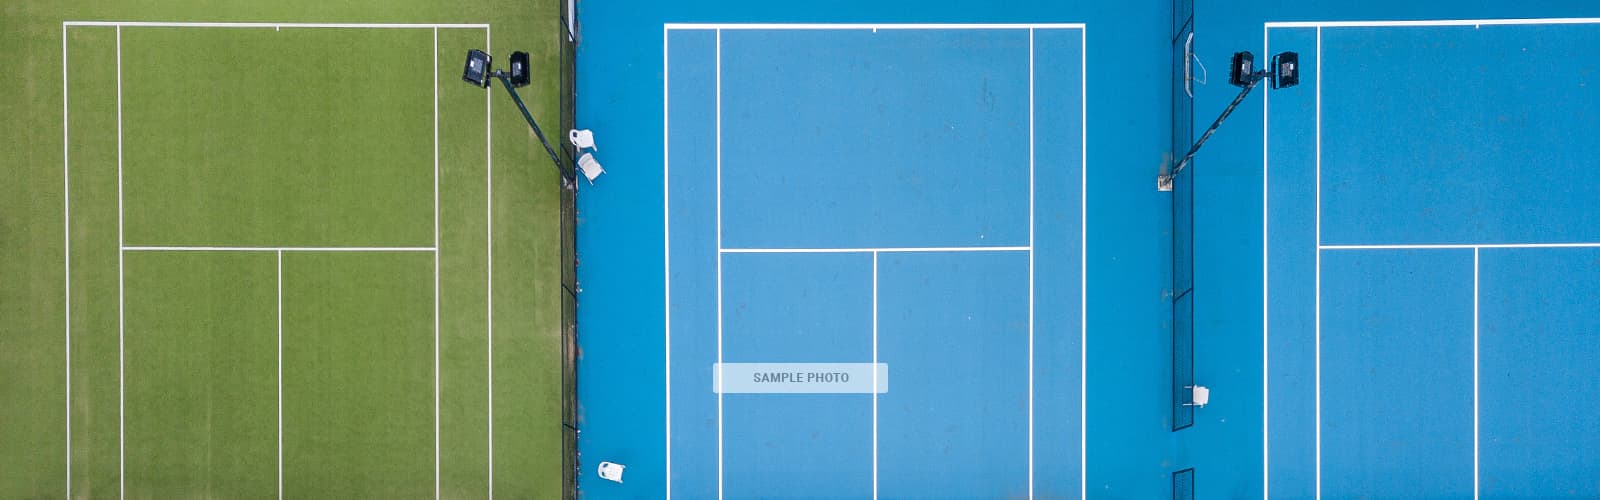 Lyon, Mack W. Middle School Tennis Courts in Overton Nevada